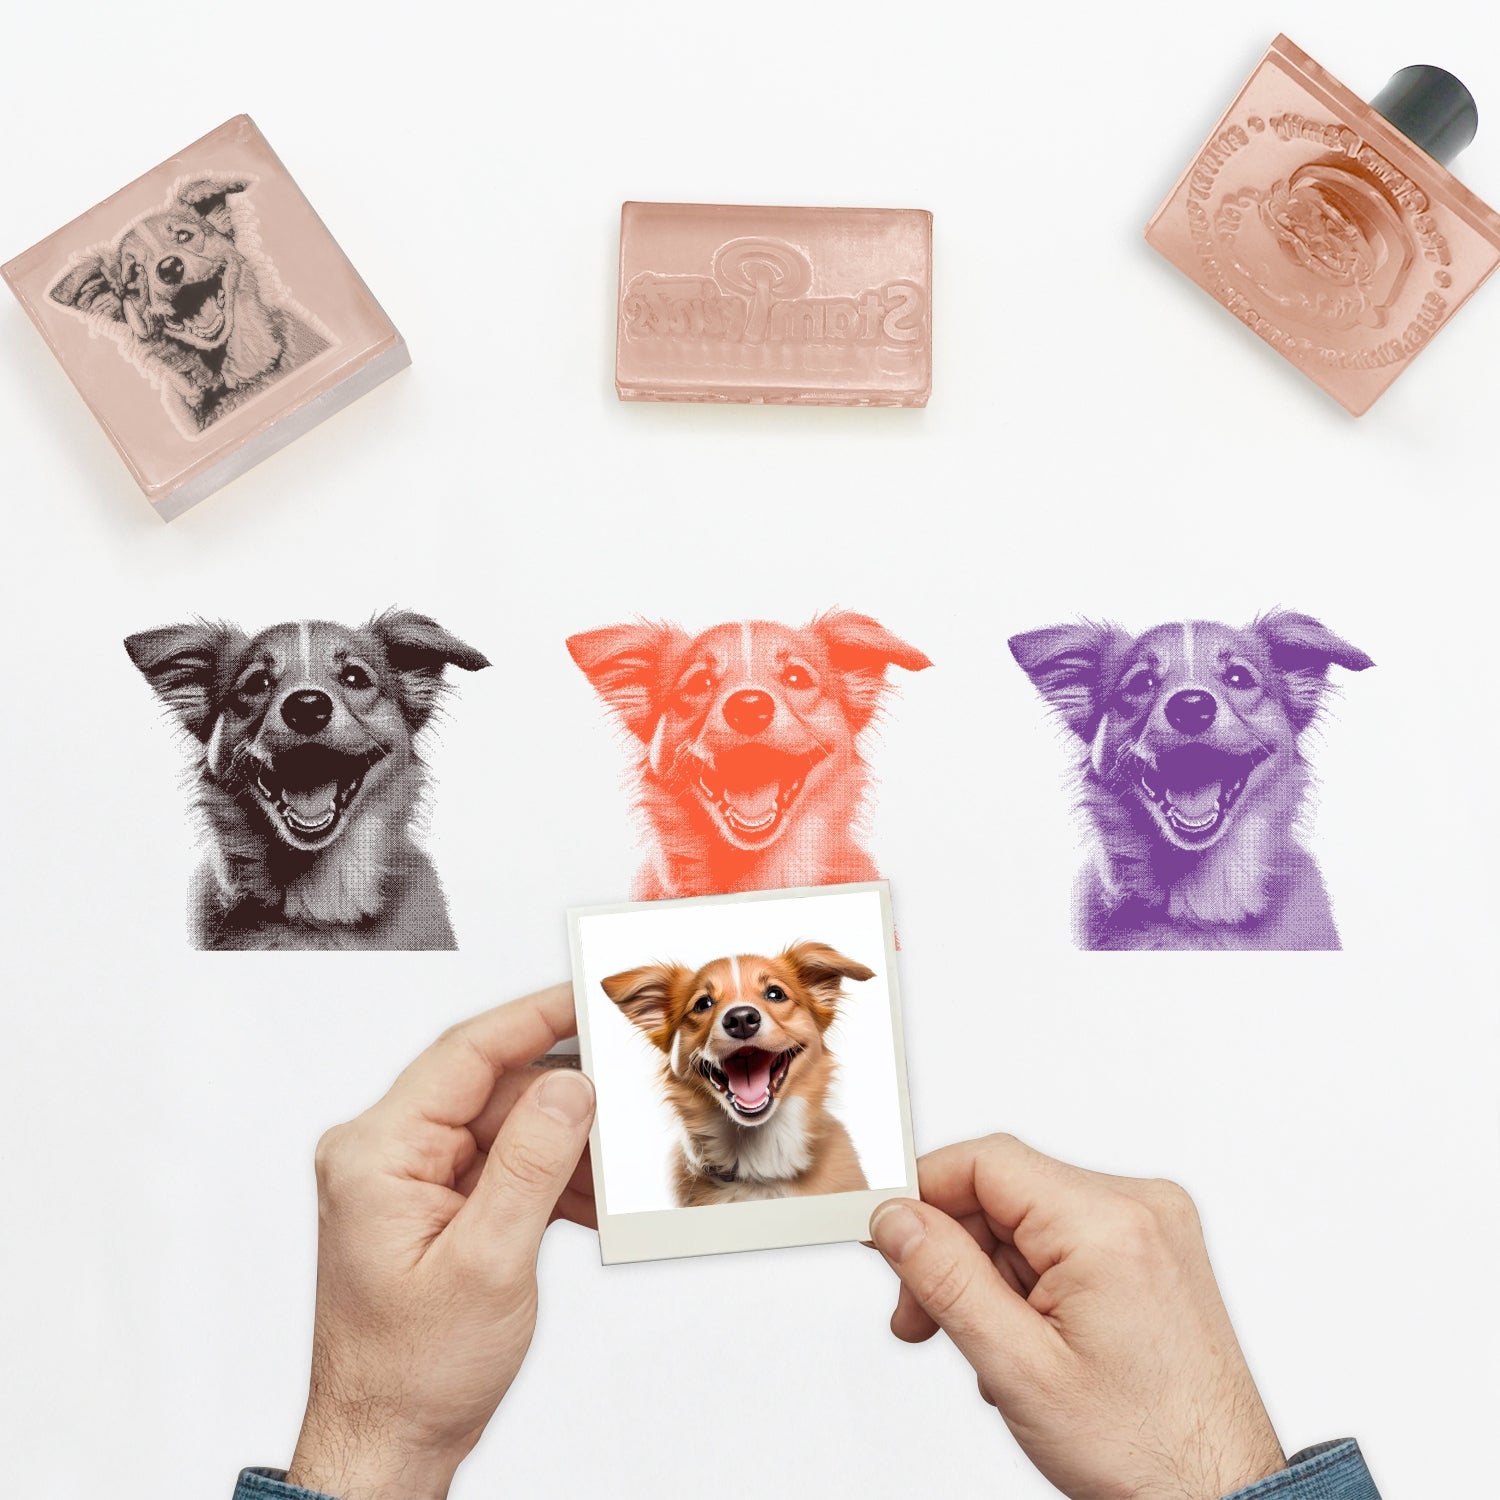 Creative dog ink stamps In An Assortment Of Designs - Alibaba.com